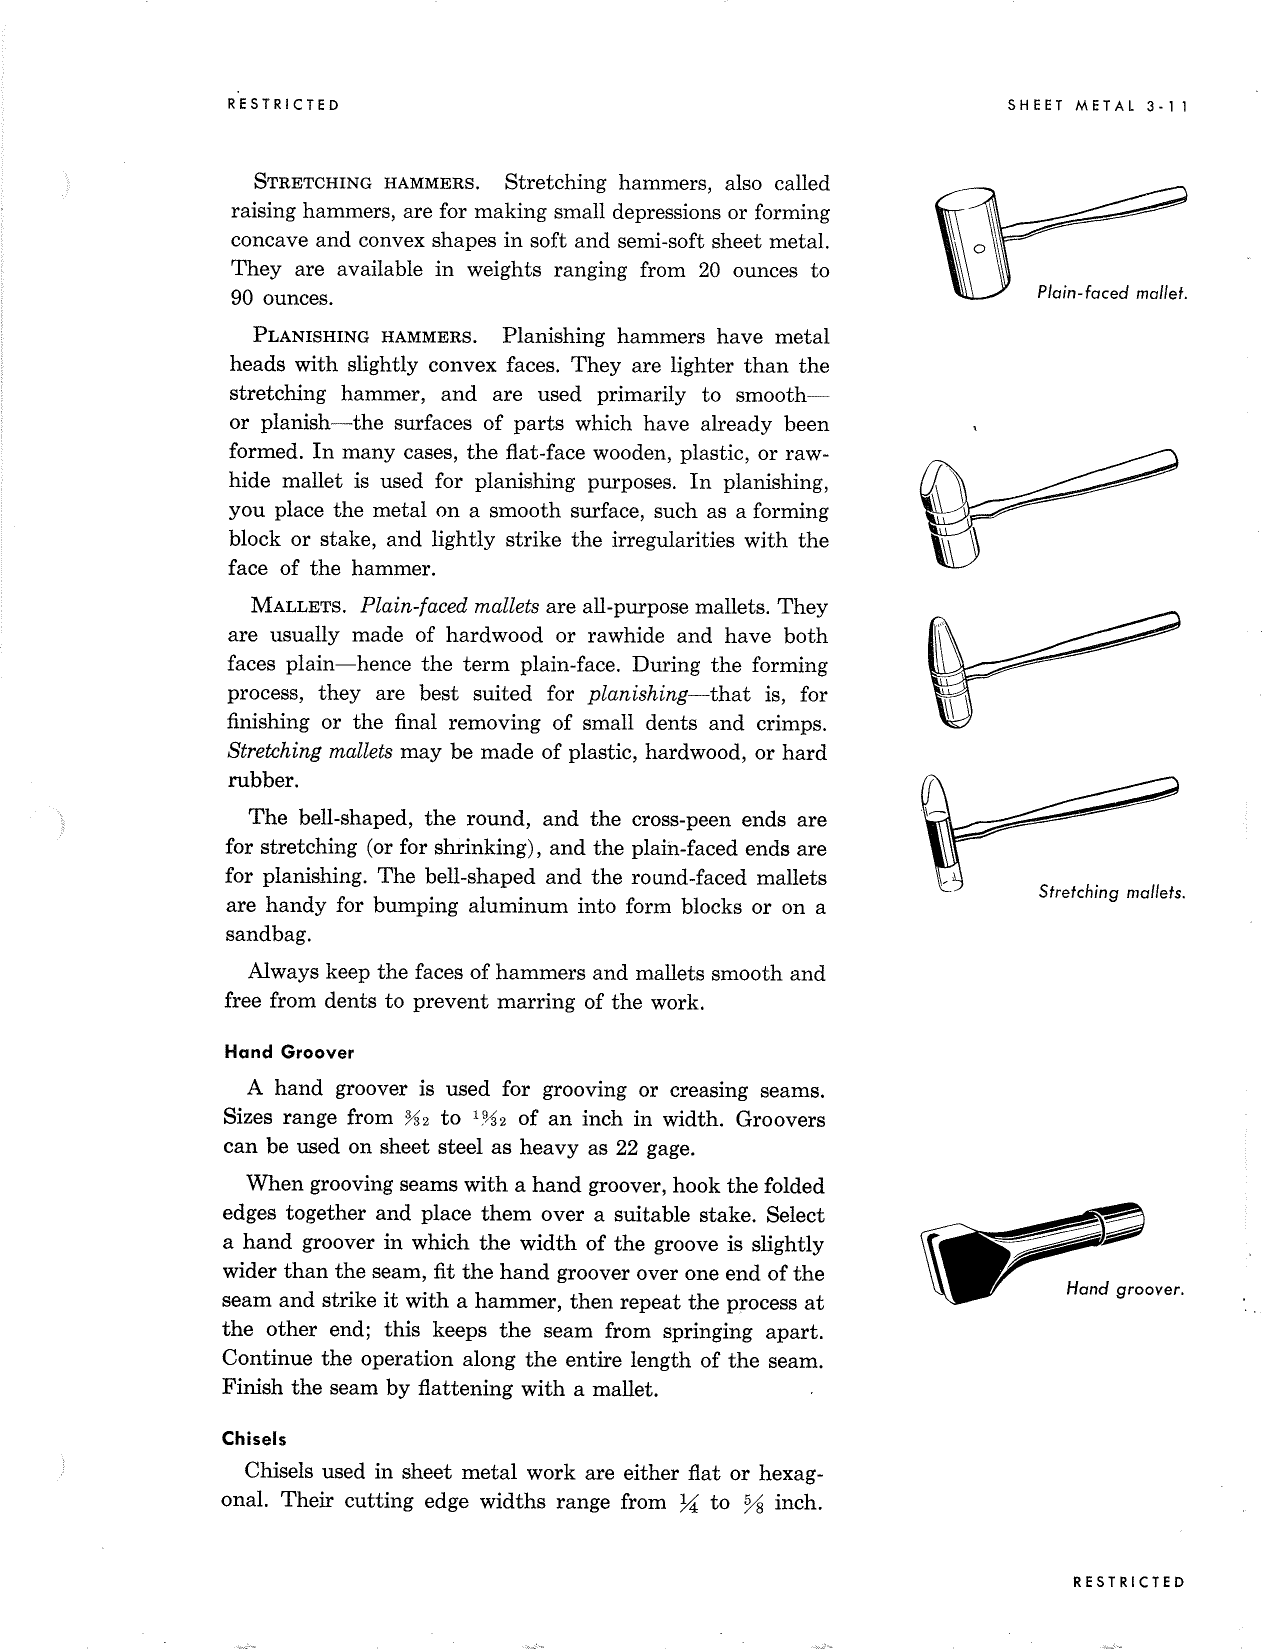 Sample page 39 from AirCorps Library document: Aircraft Sheet Metal Maintenance 